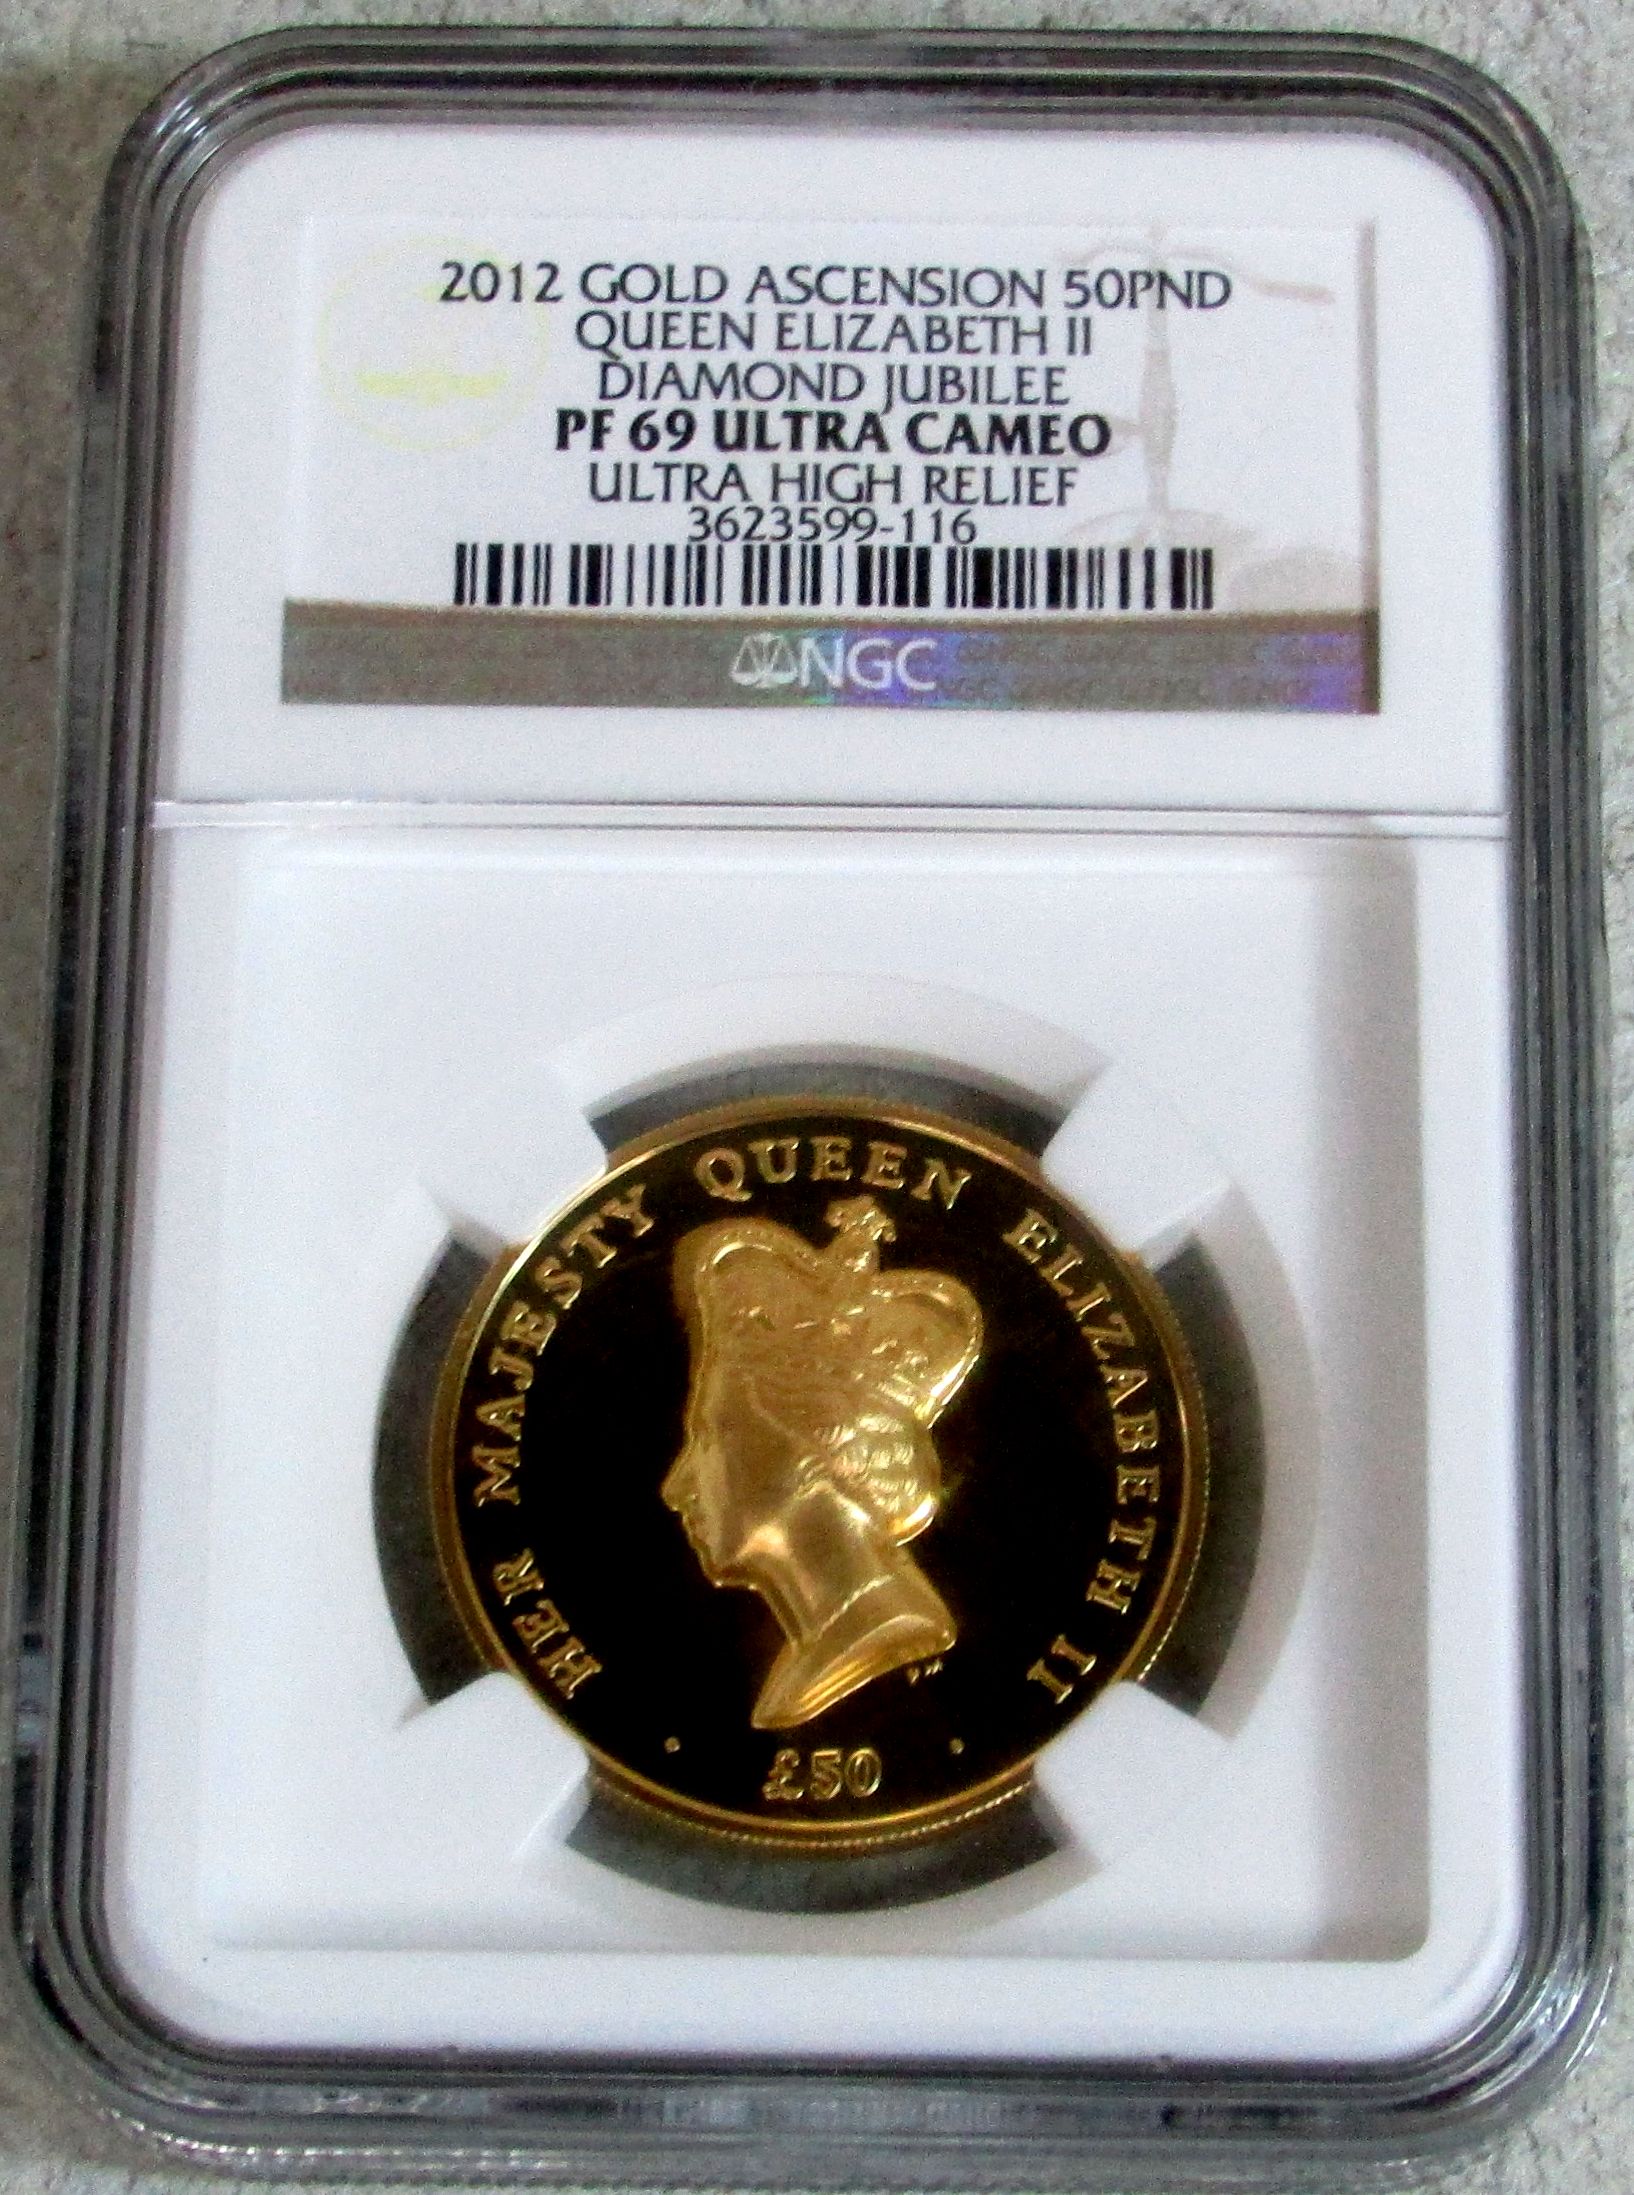 2012 GOLD ASCENSION ISLAND 50 POUND NGC PROOF 69 ULTRA CAMEO ULTRA HIGH RELIEF "DIAMOND JUBILEE